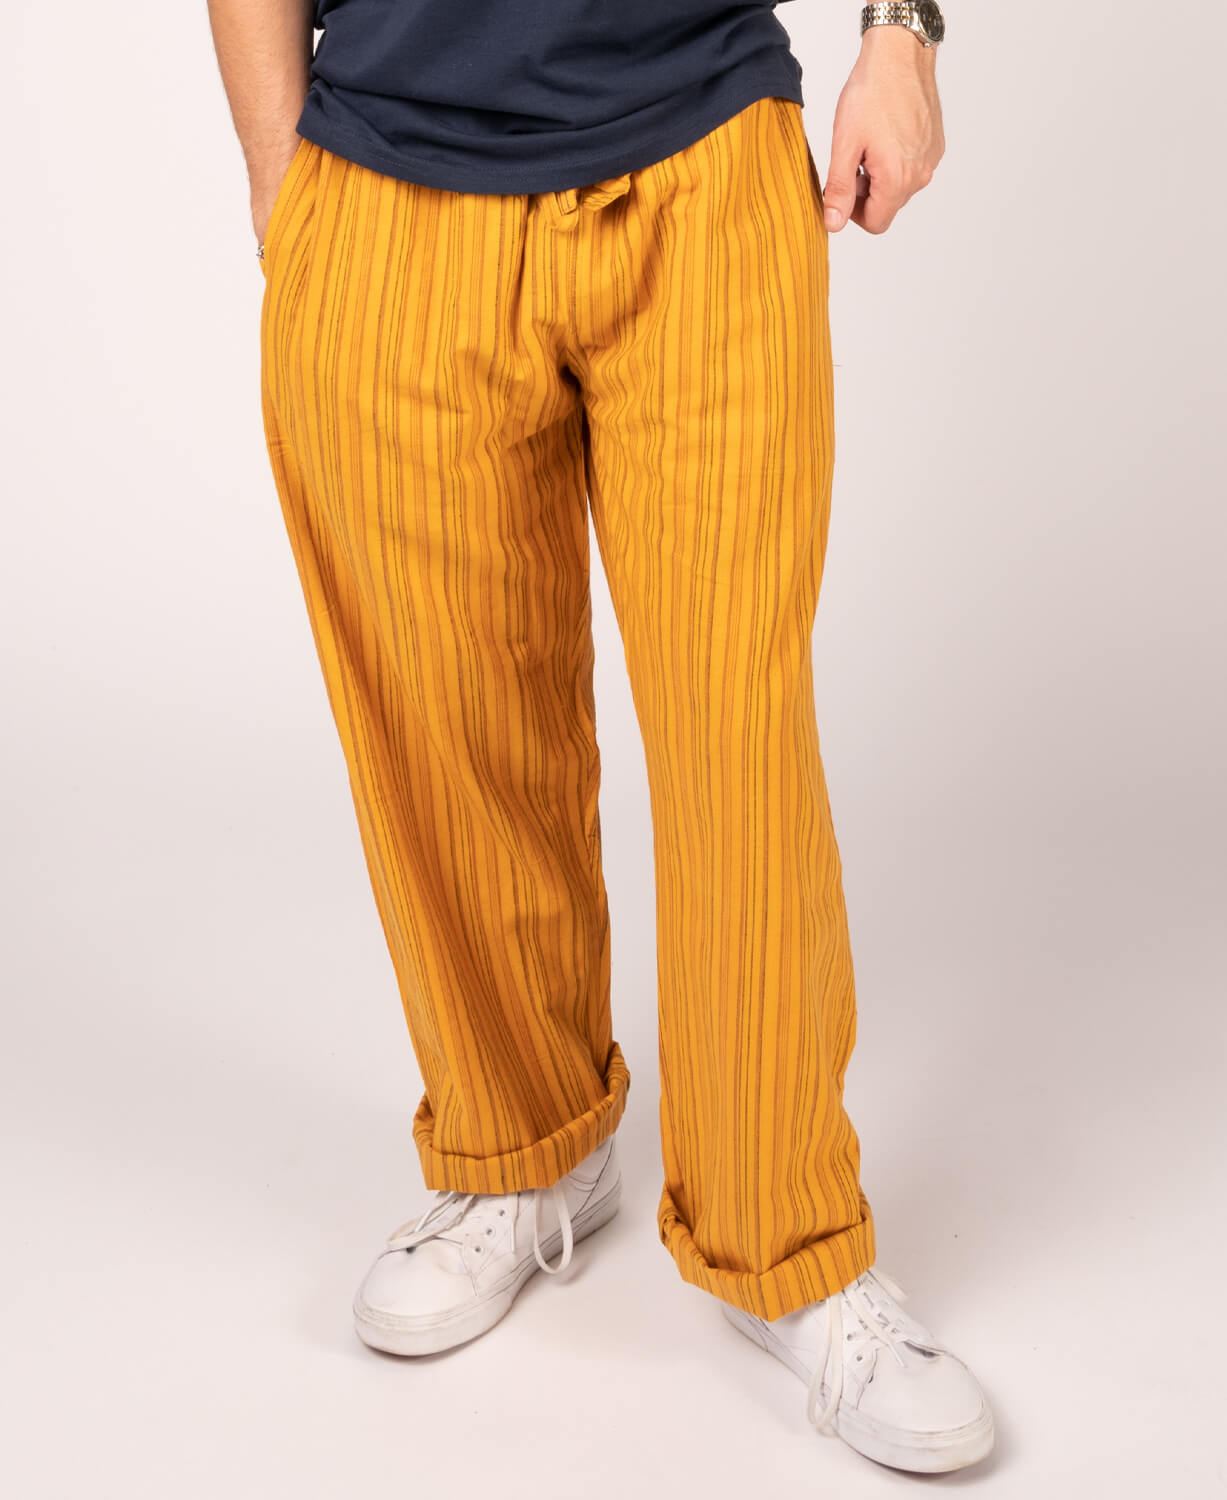 Striped Hippie Lounge Pants - Pineapple Express